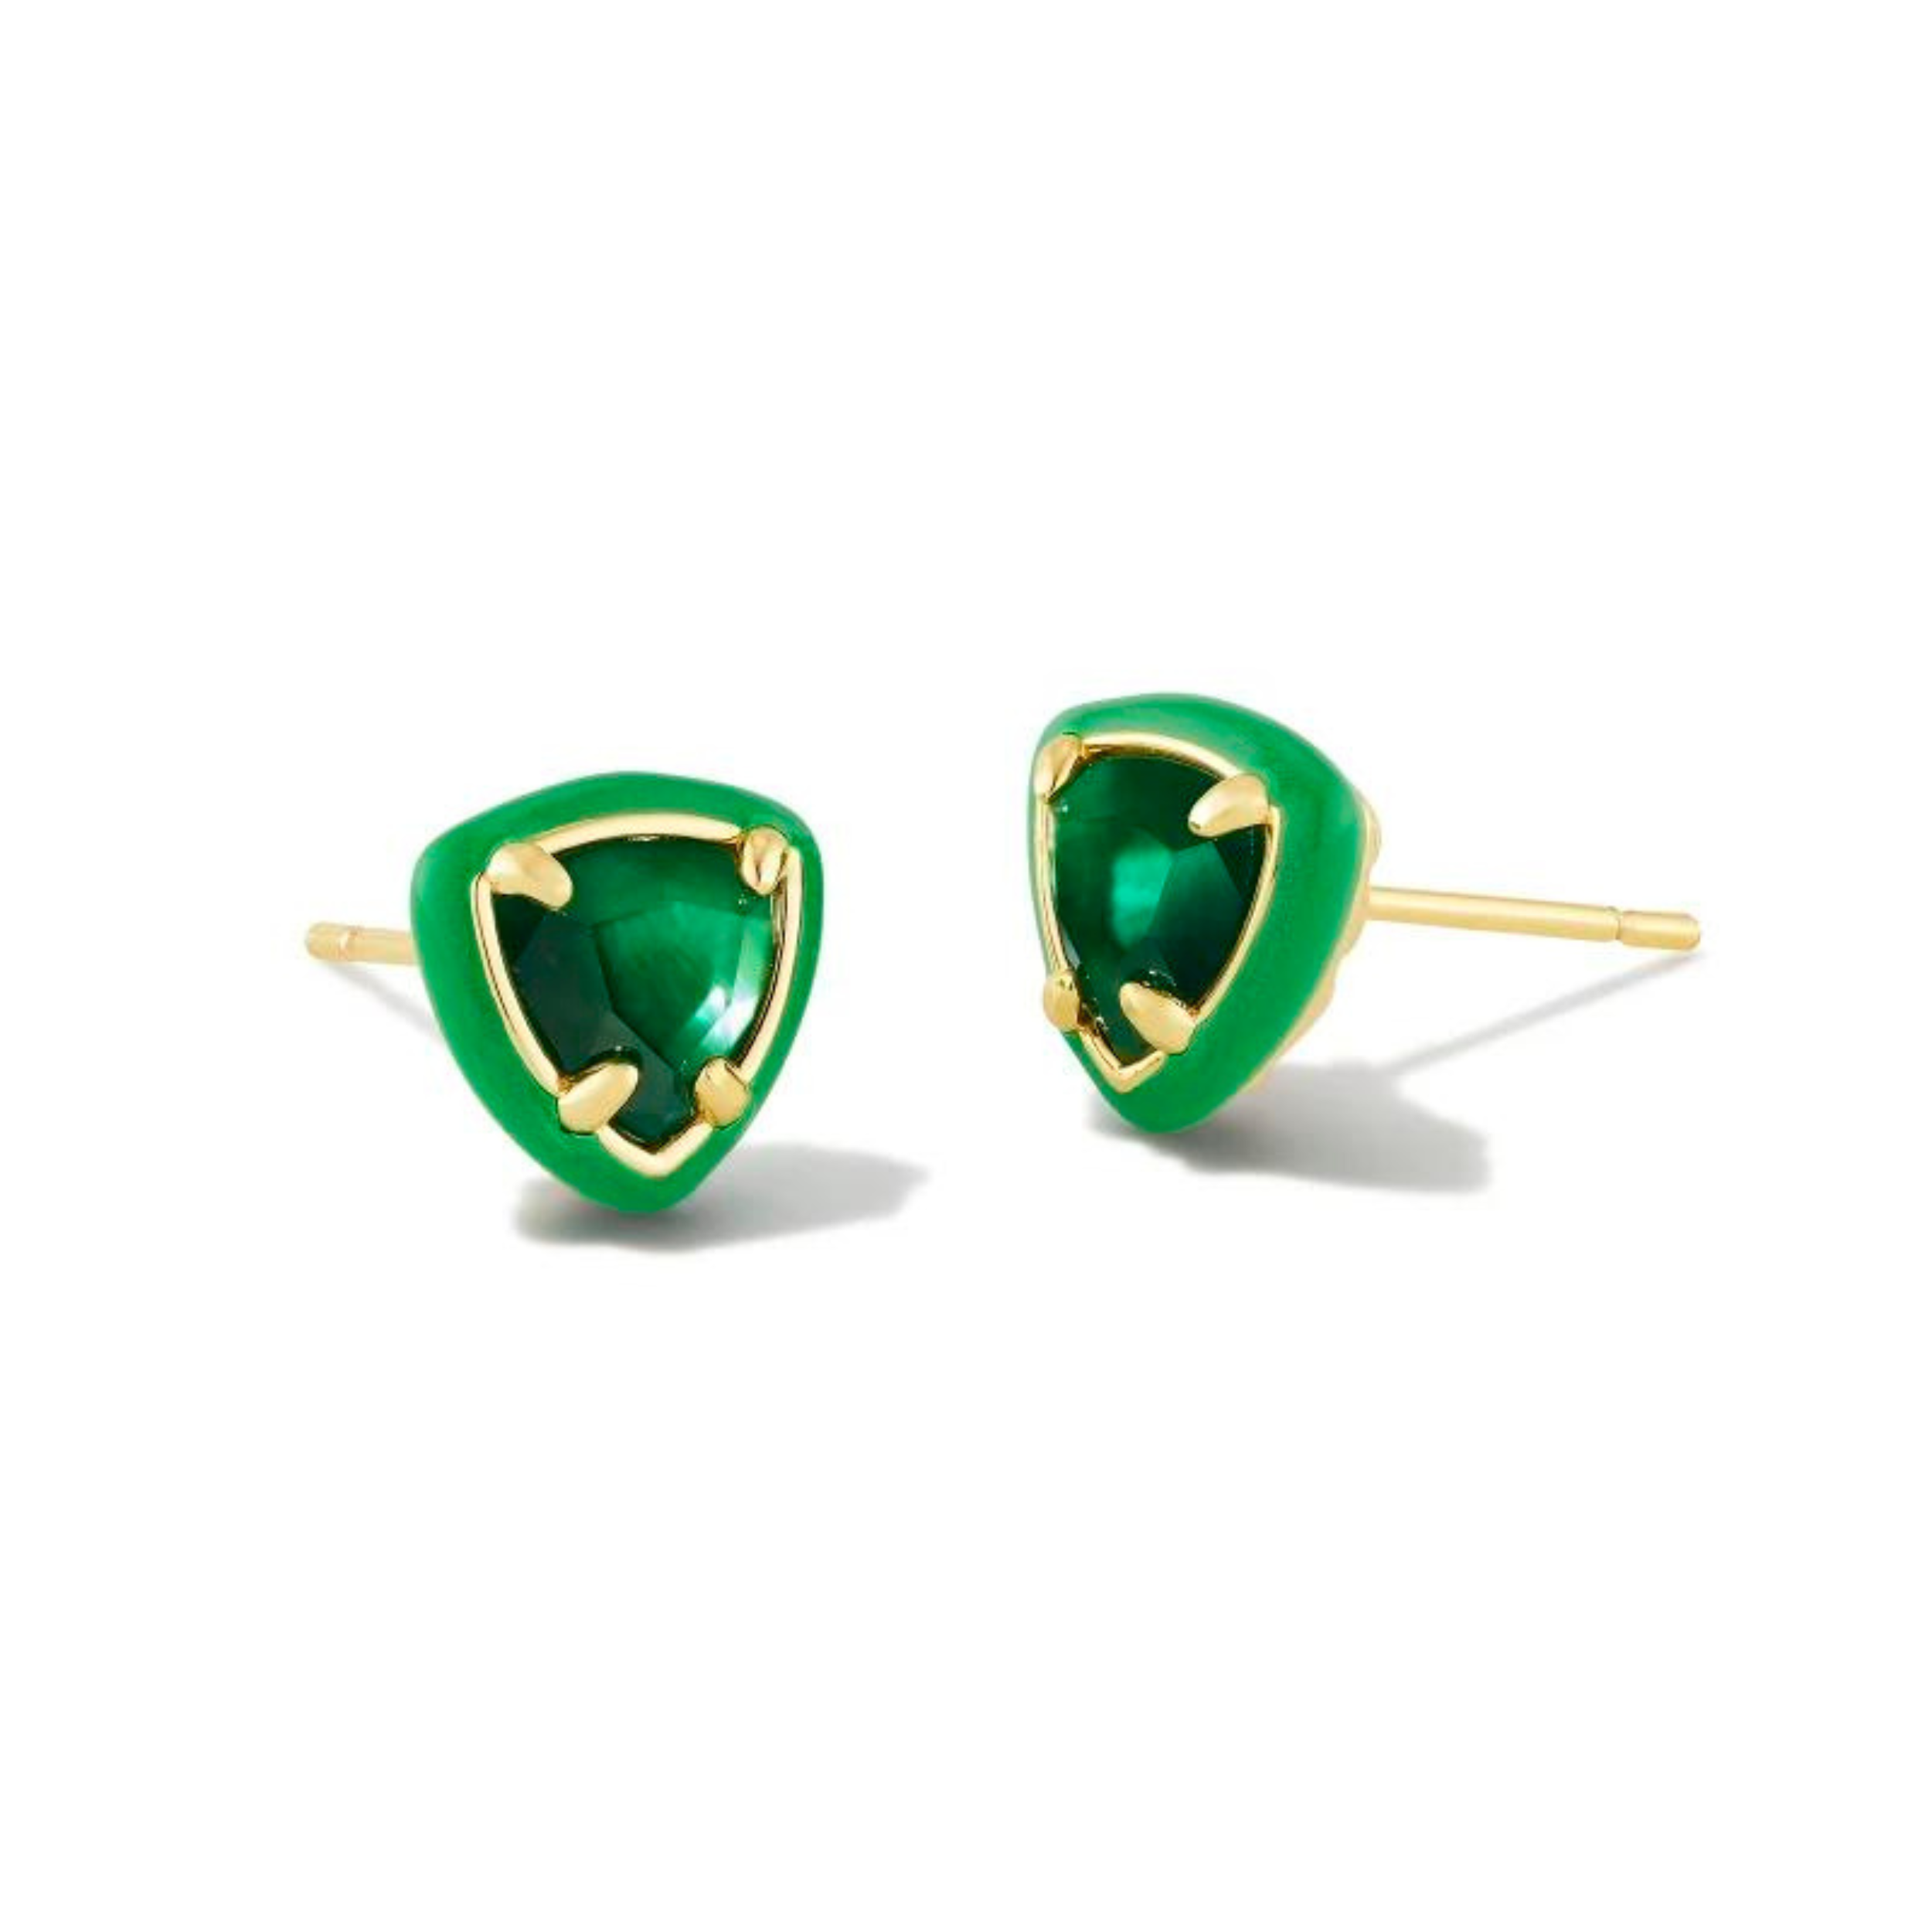 Green framed, triangle shaped stud earrings with a center green stone and a gold ear post. These earrings are pictured on a white background. 